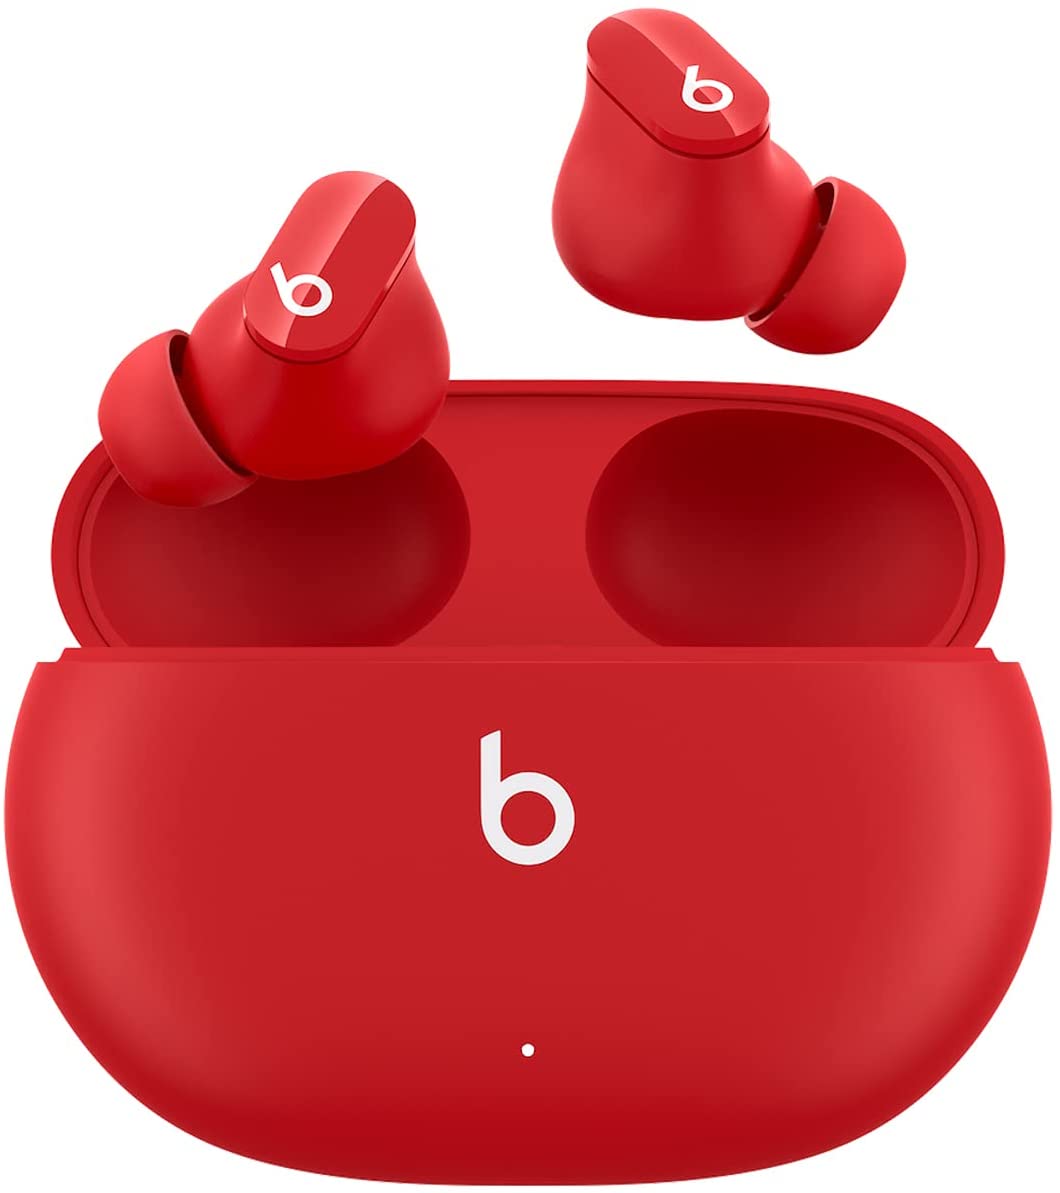 Beats Studio Buds Noise Cancelling Wireless Earbuds - Red (New)